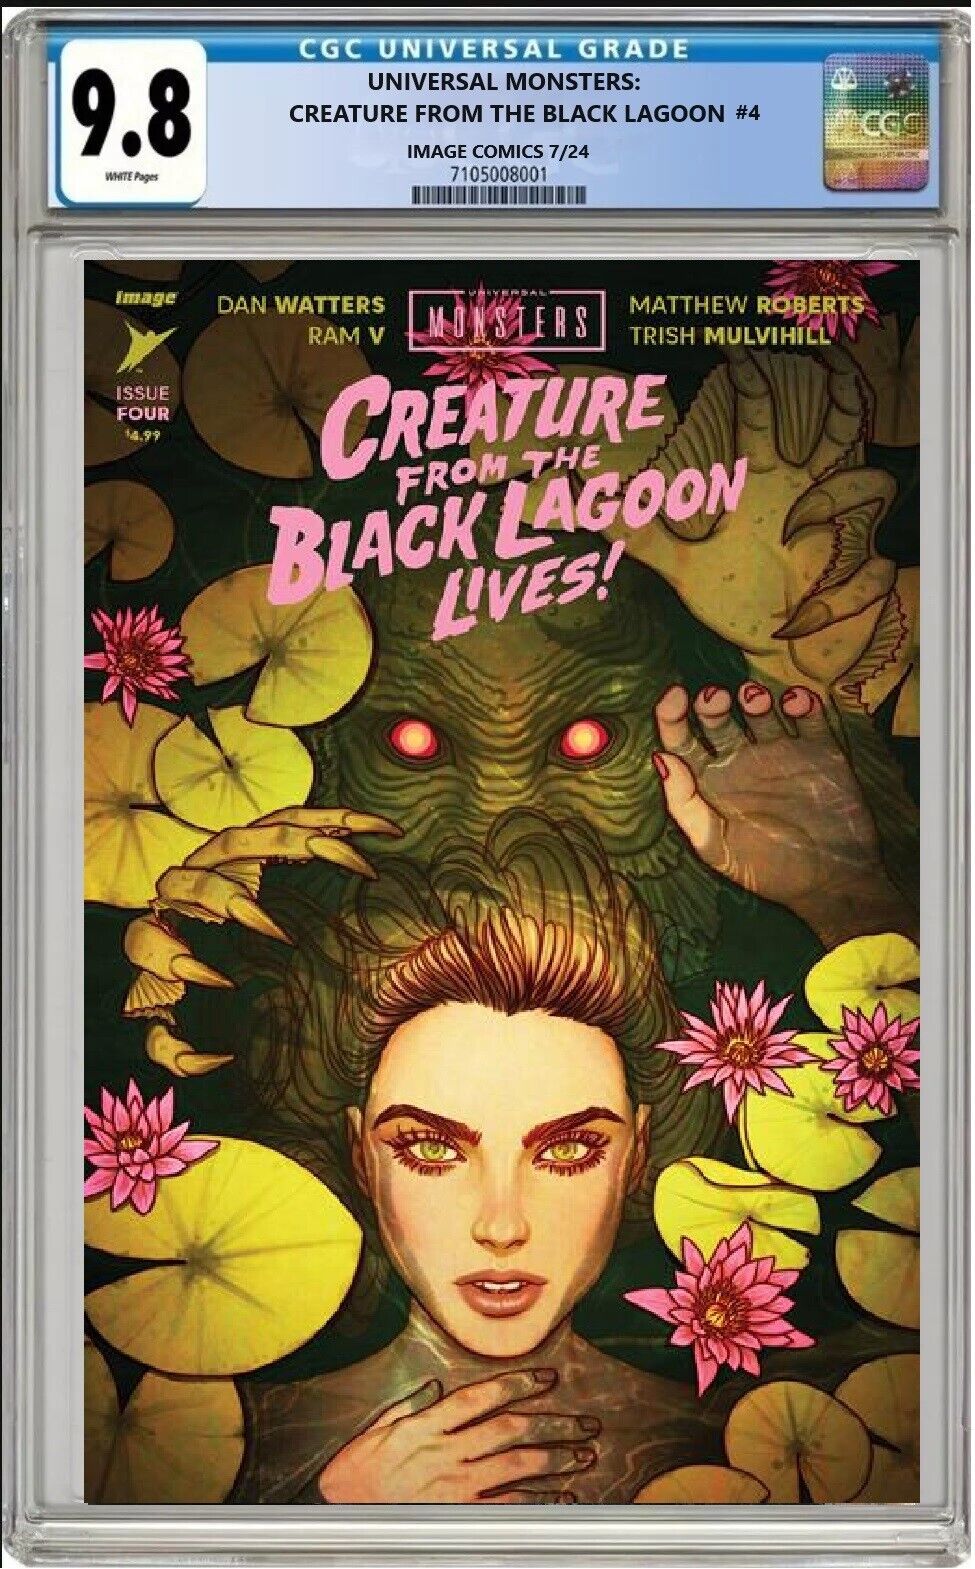 UNIVERSAL MONSTERS CREATURE FROM THE BLACK LAGOON 4 JENNY FRISON CGC 9.8 PRESALE